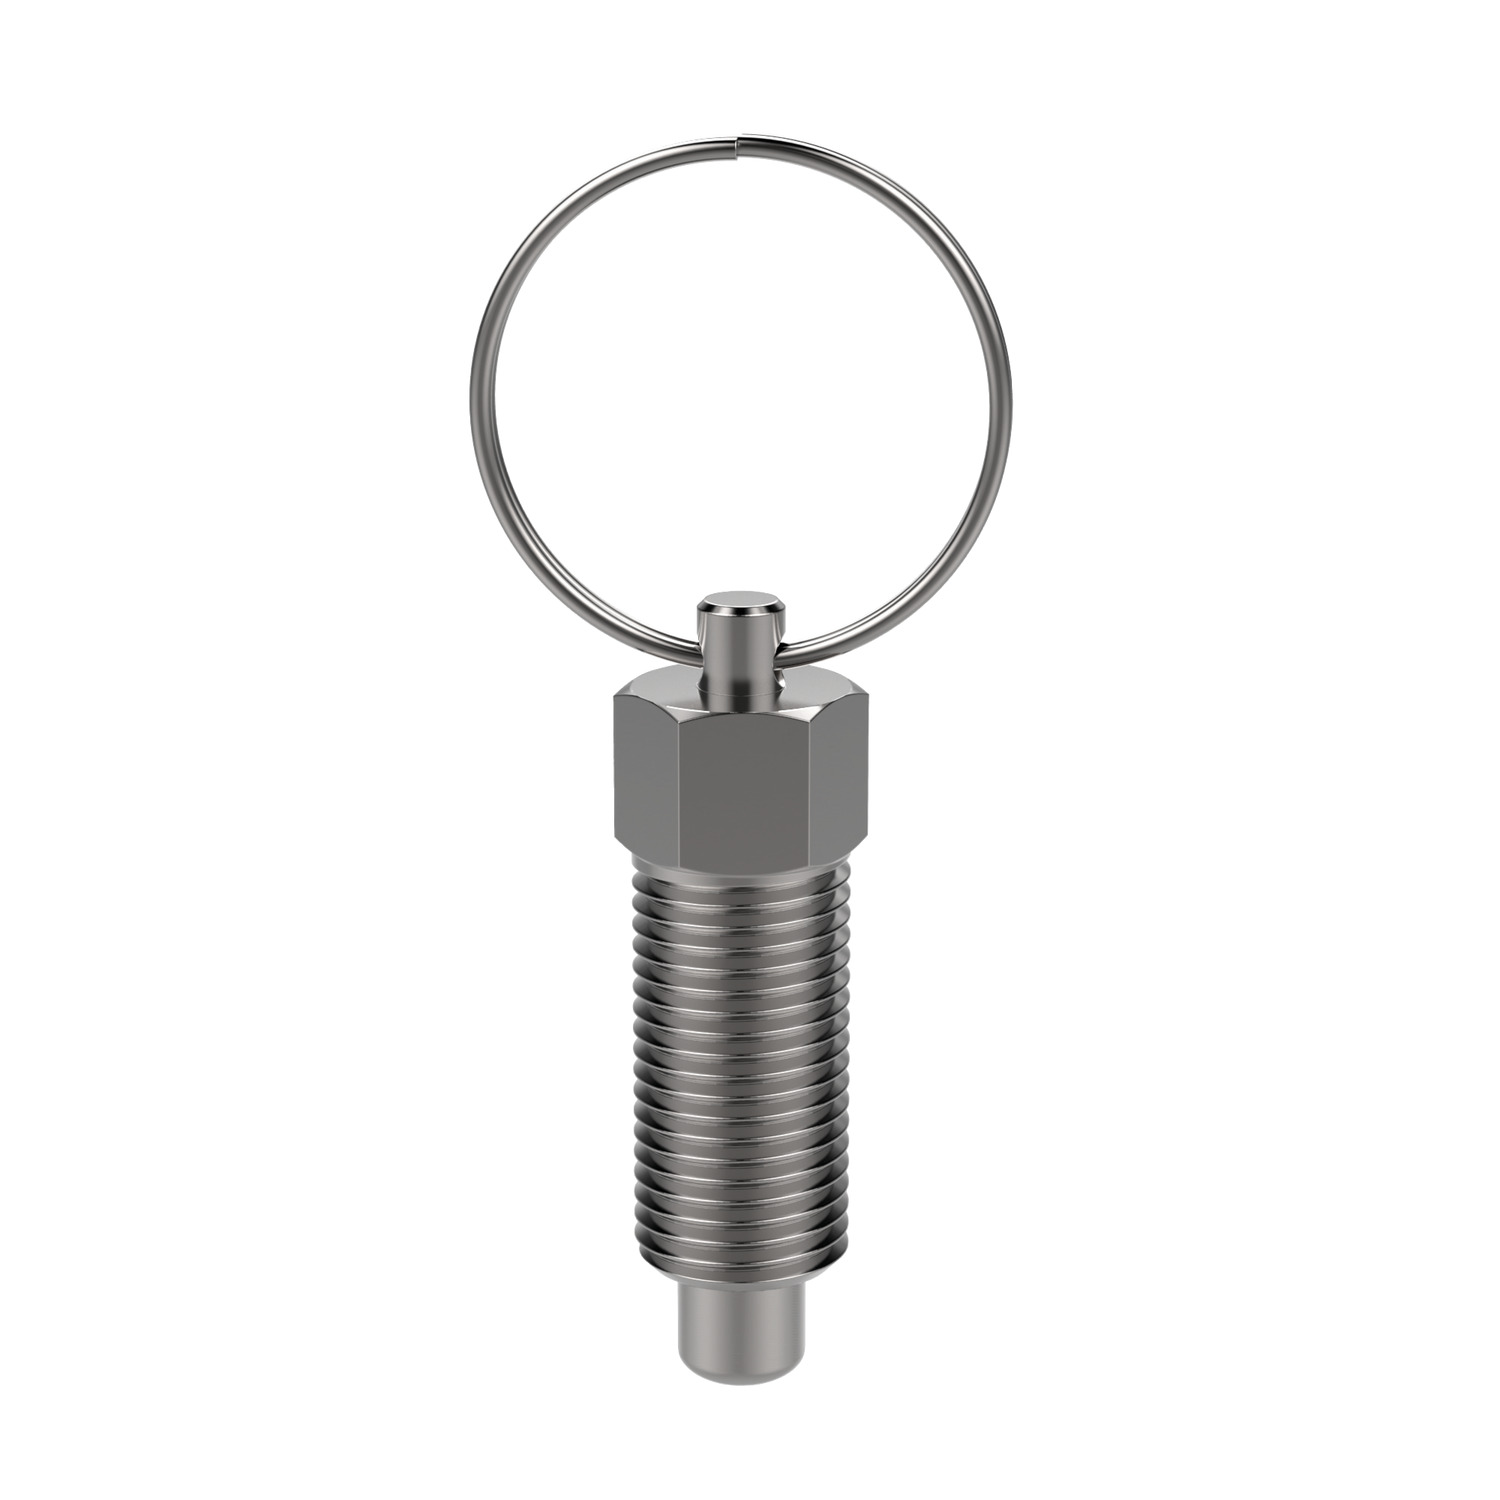 Index Plungers - Pull Ring Pull-ring, non-locking iIndex Plungers with coarse thread. For applications where high precision is not required. Temperature resistance up to 250ºC.